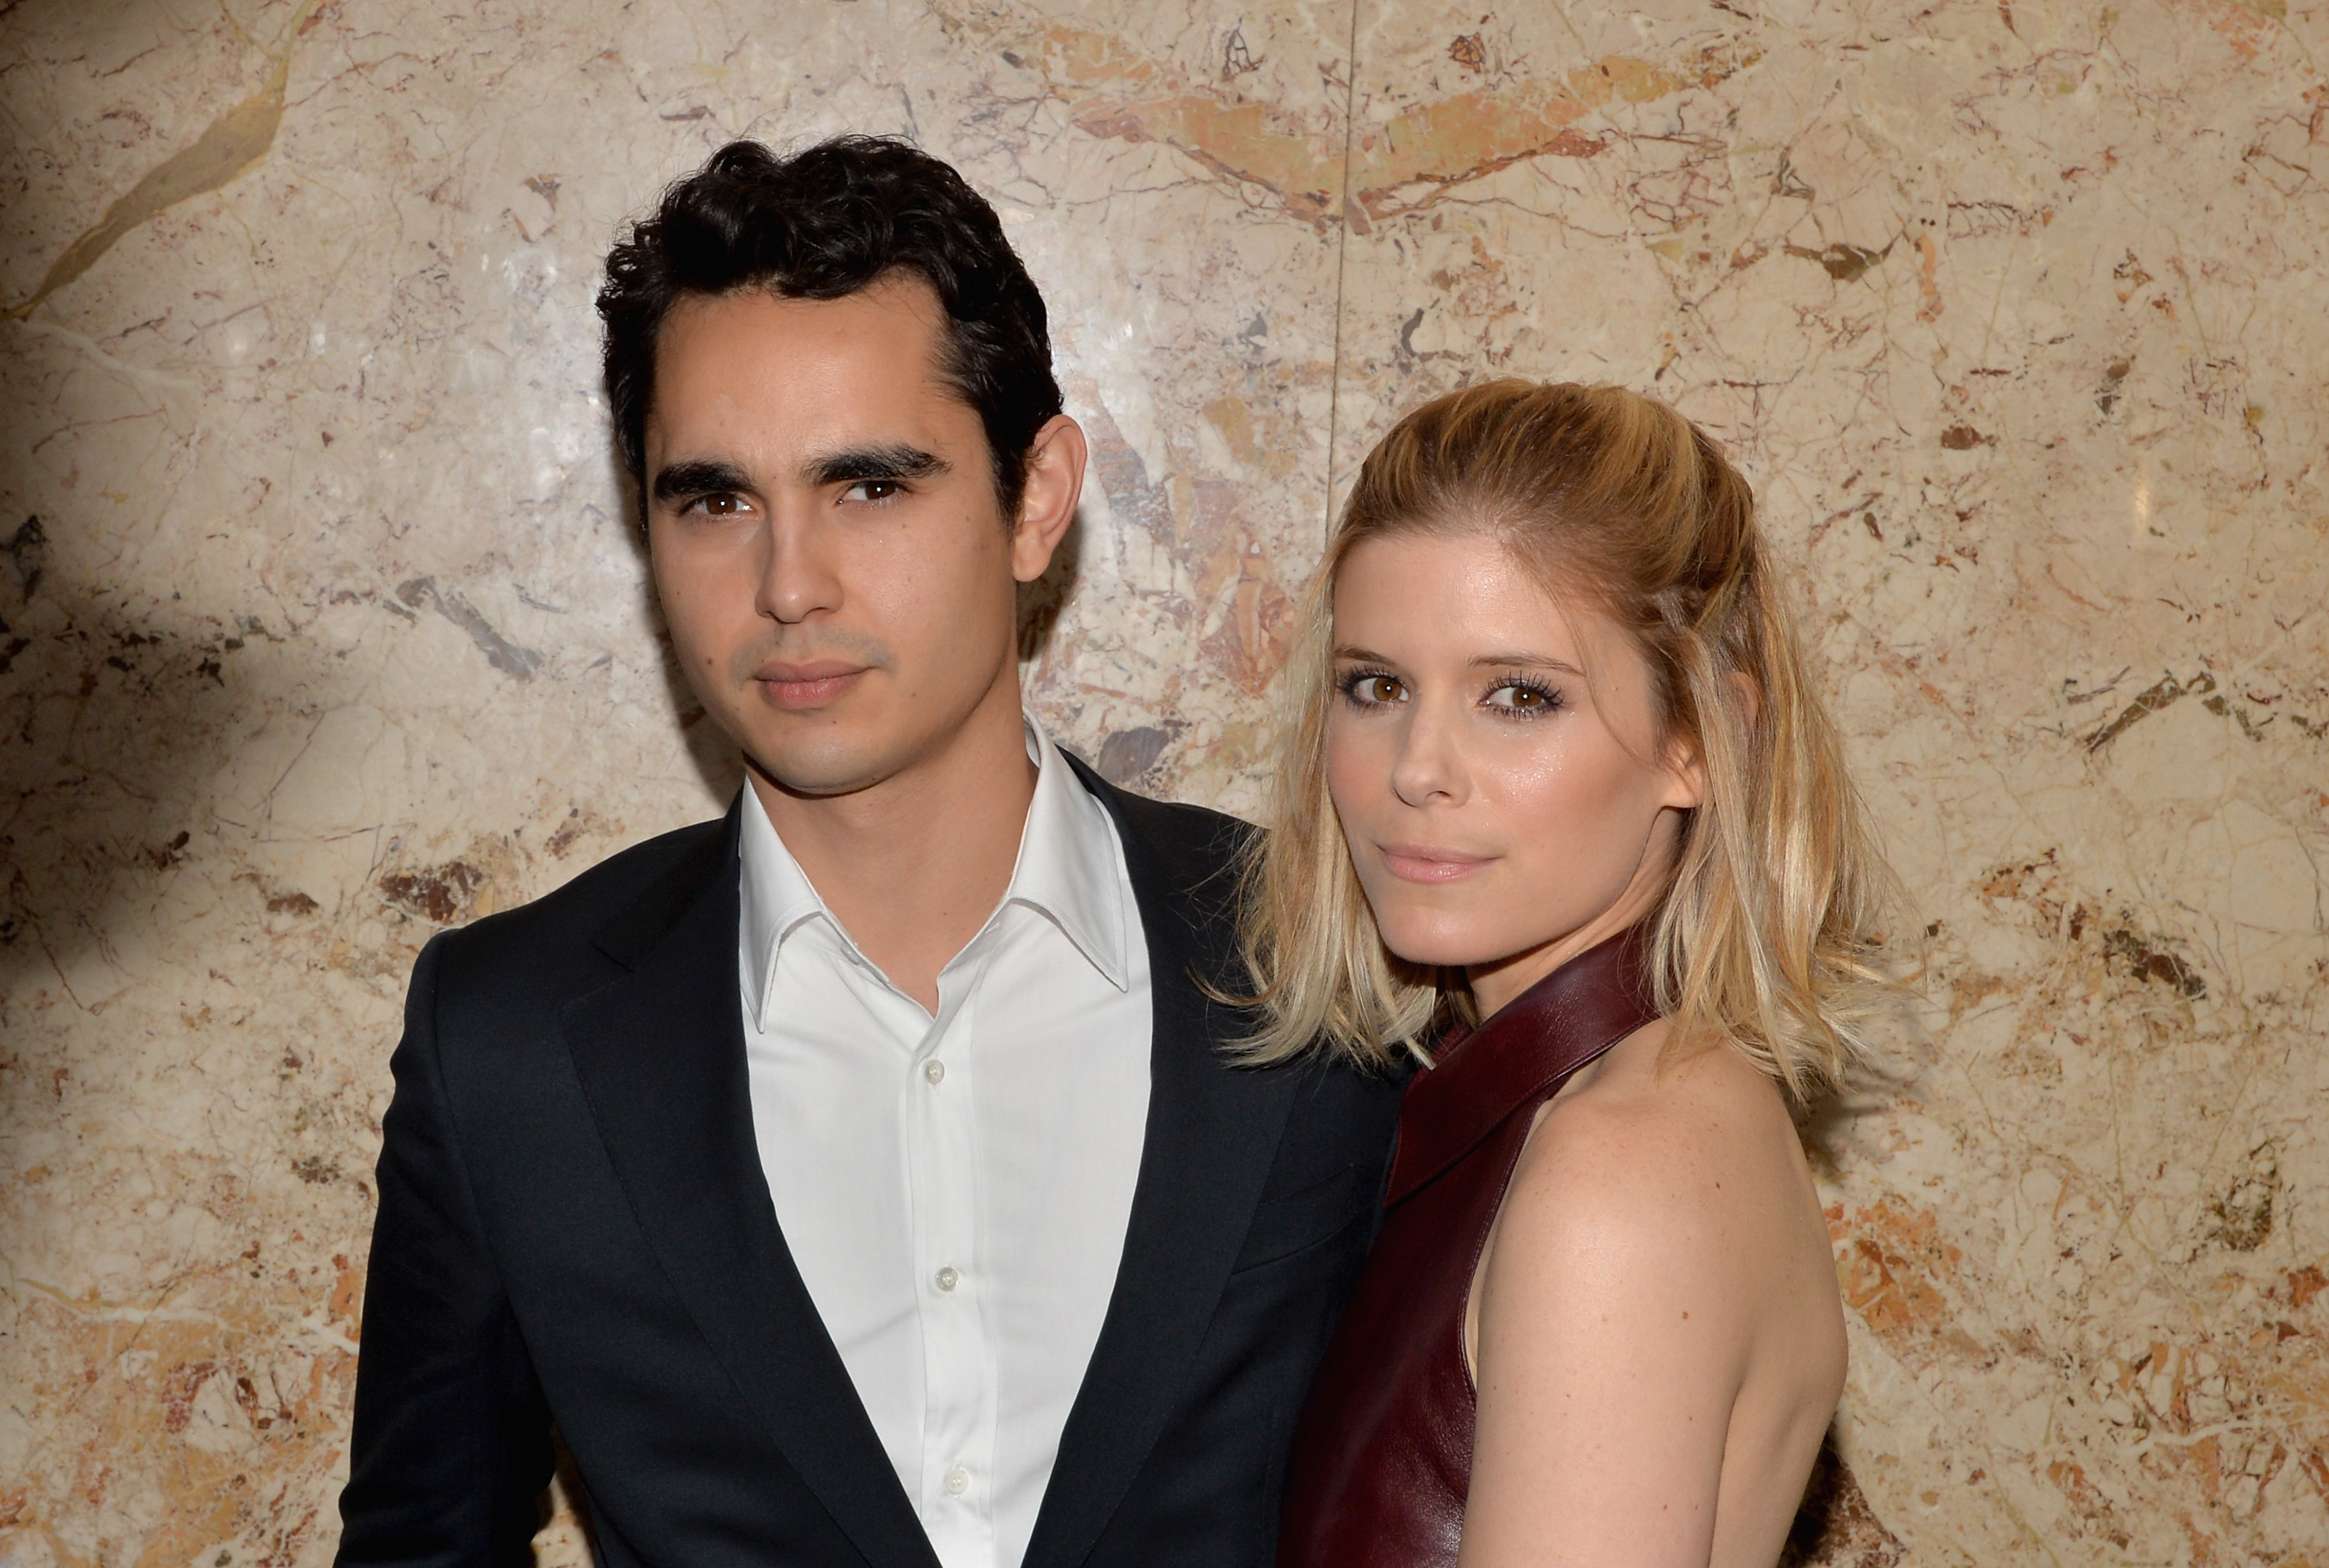 Actor Max Minghella and his girlfriend Kate Mara attend the Gucci beauty launch event on June 4, 2014 in New York City | Source: Getty Images